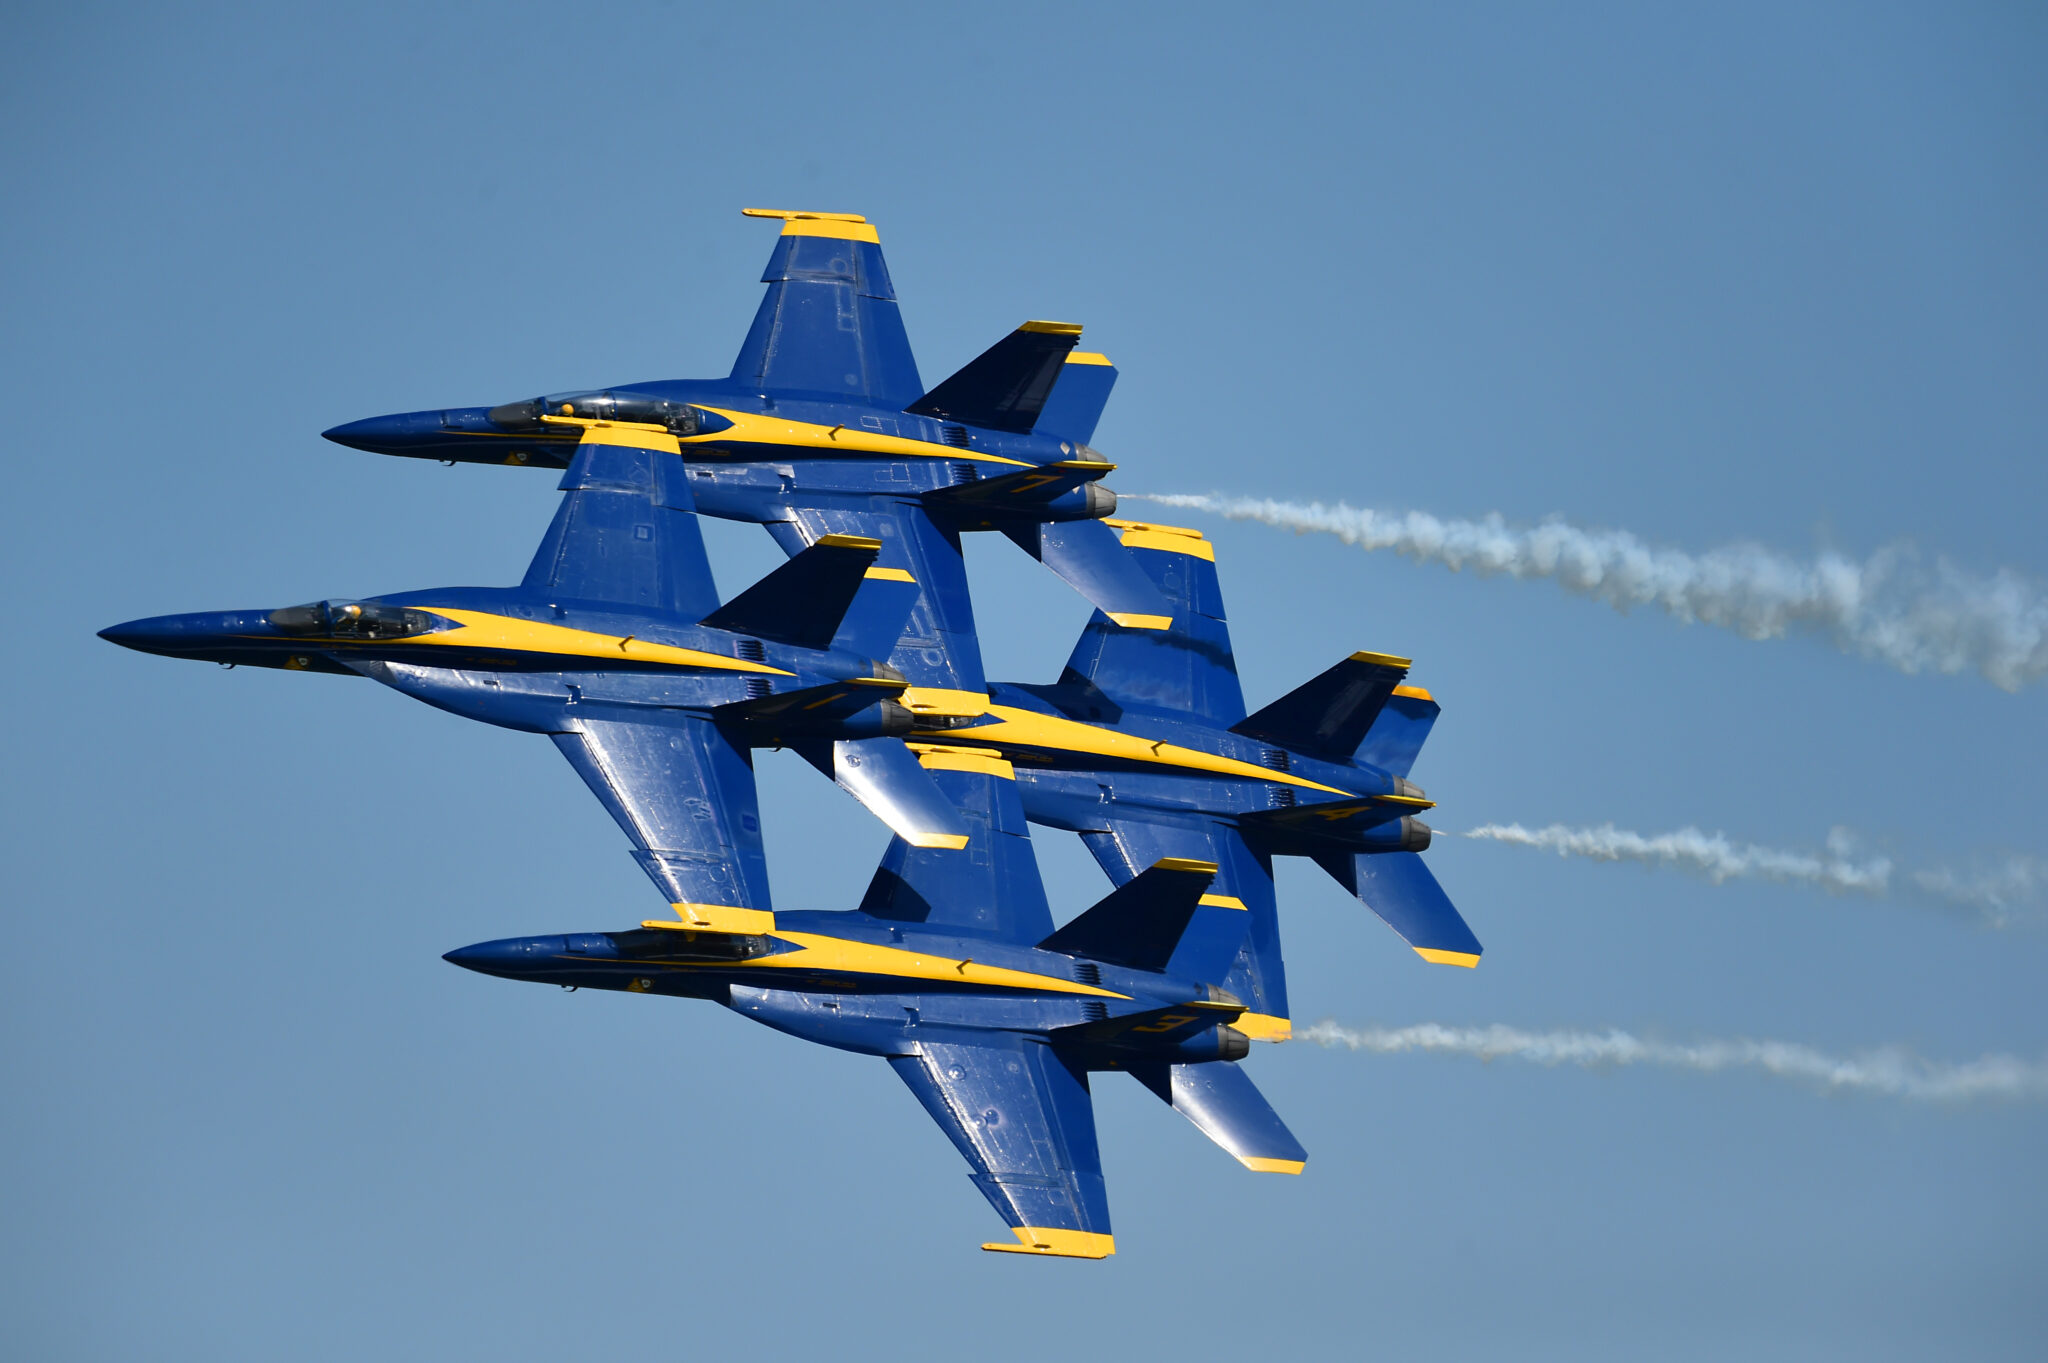 Link to: The Blue Angels Air Show at Vidalia Onion Festival Saturday April 27 and Sunday April 28